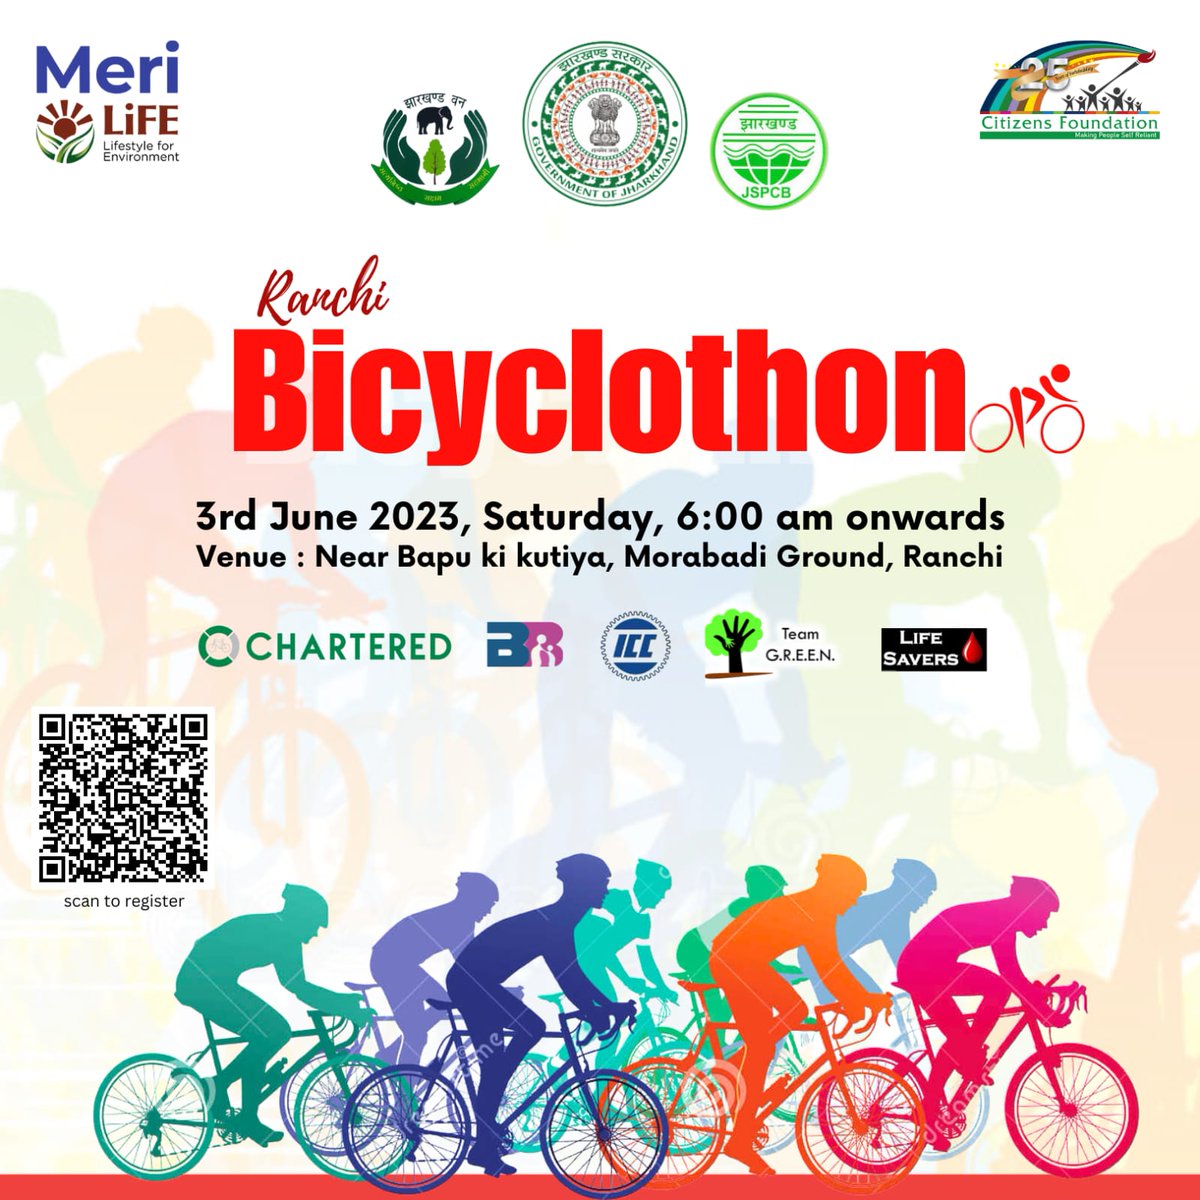 Participate in large numbers to pledge for changes in our lifestyles for better future! Come with your cycles on *3rd June at 6am at Morabadi Ground*. 200 extra cycles available. #Ranchi #MissionLiFE @JharkhandCMO @prdjharkhand @RanchiPIB @ZeeBiharNews @News18Bihar